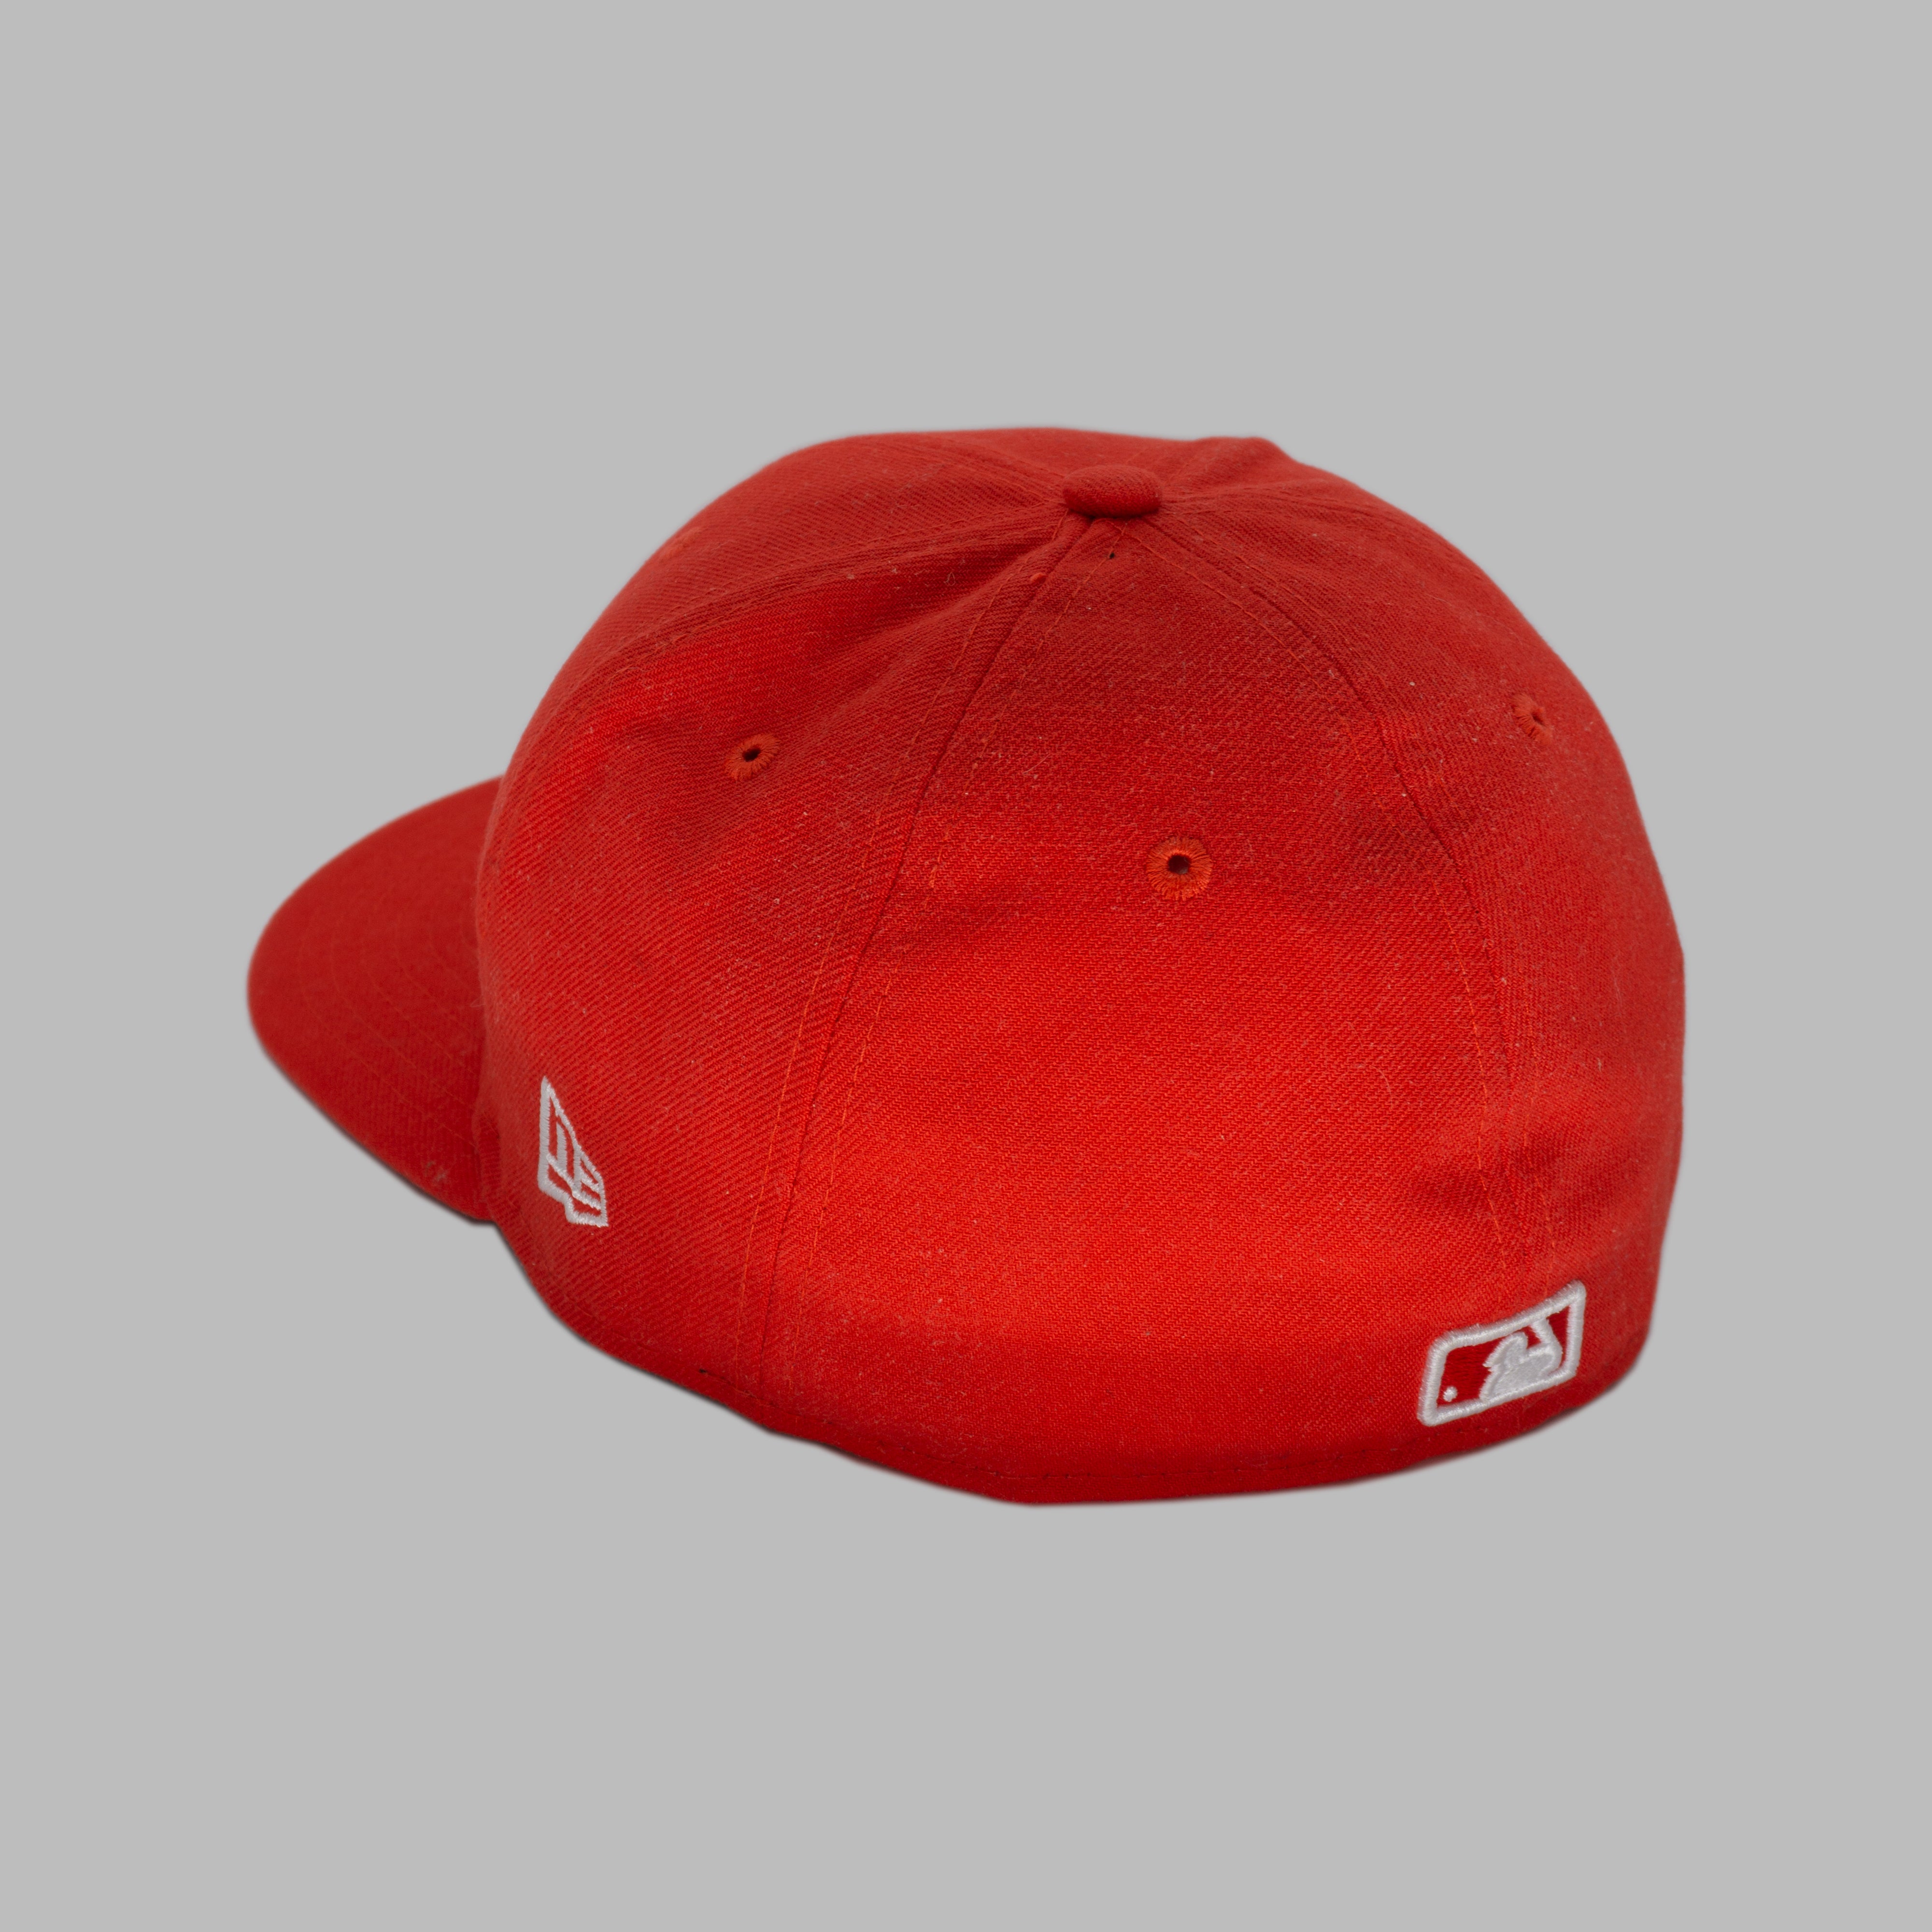 RED 2FACED FITTED (size 7 1/4)